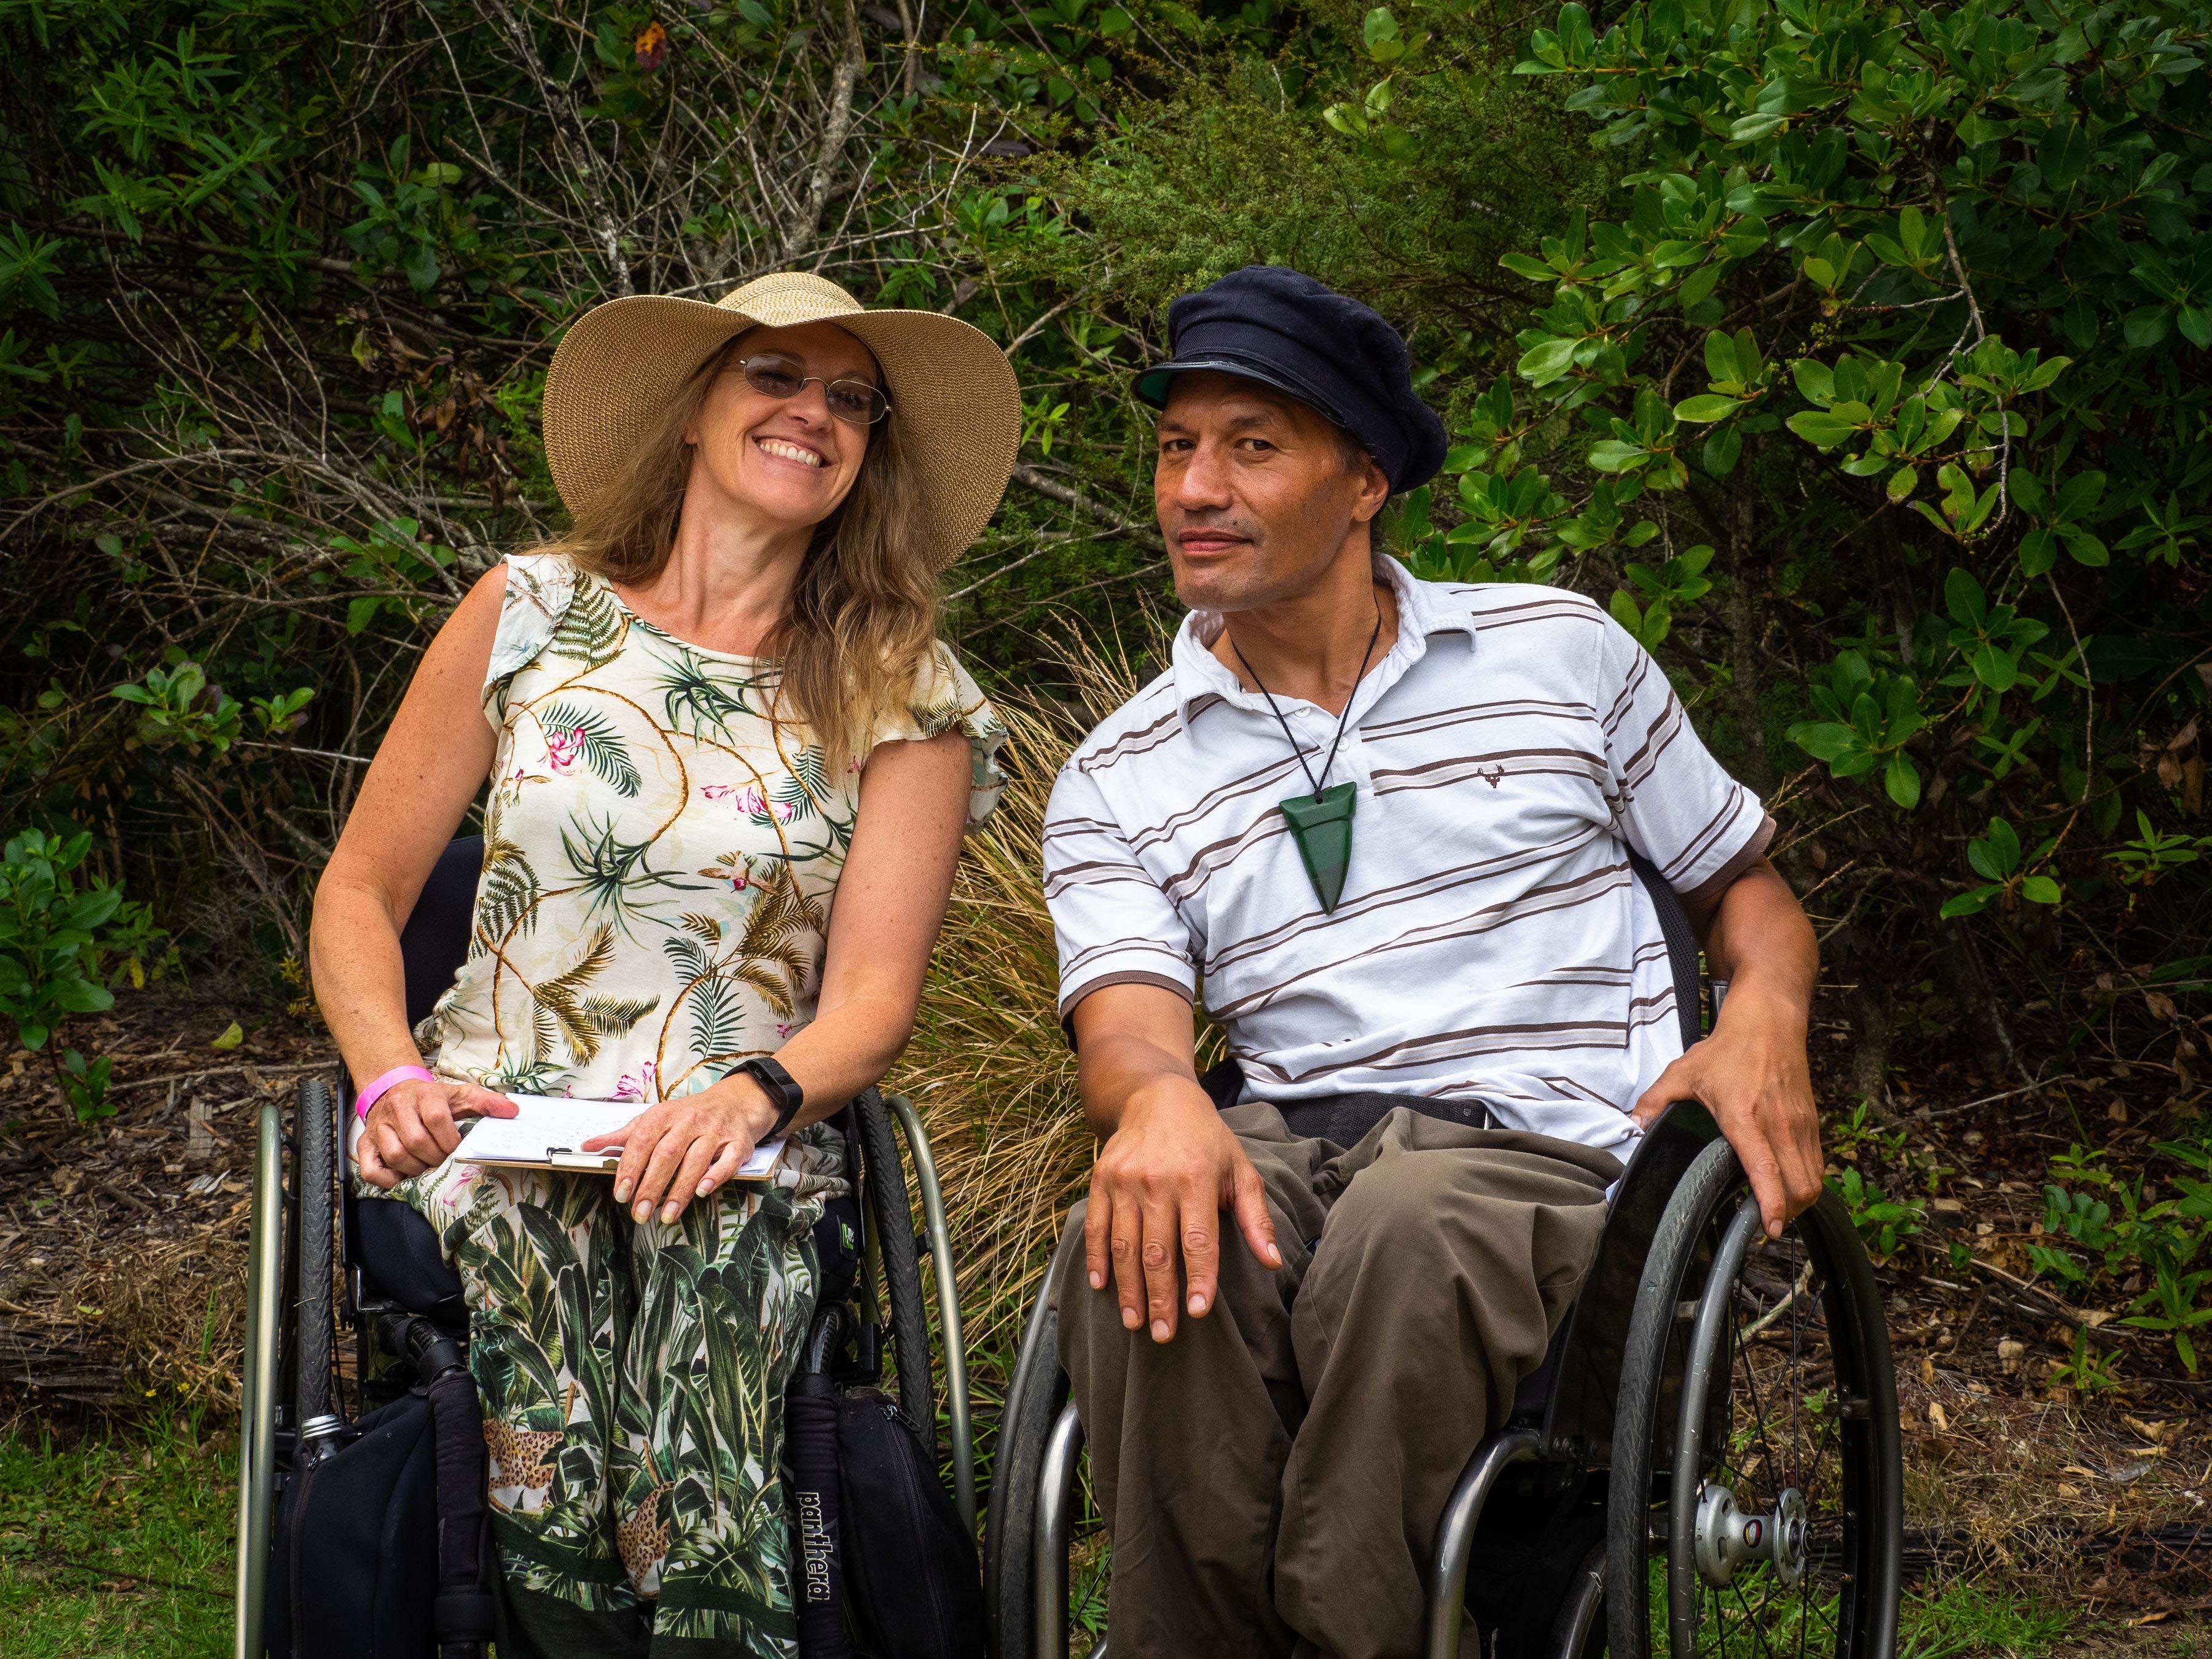 Two people in a natural setting, one light-skinned female, one Māori male, leaning in towards eachother and smiling at the camera.